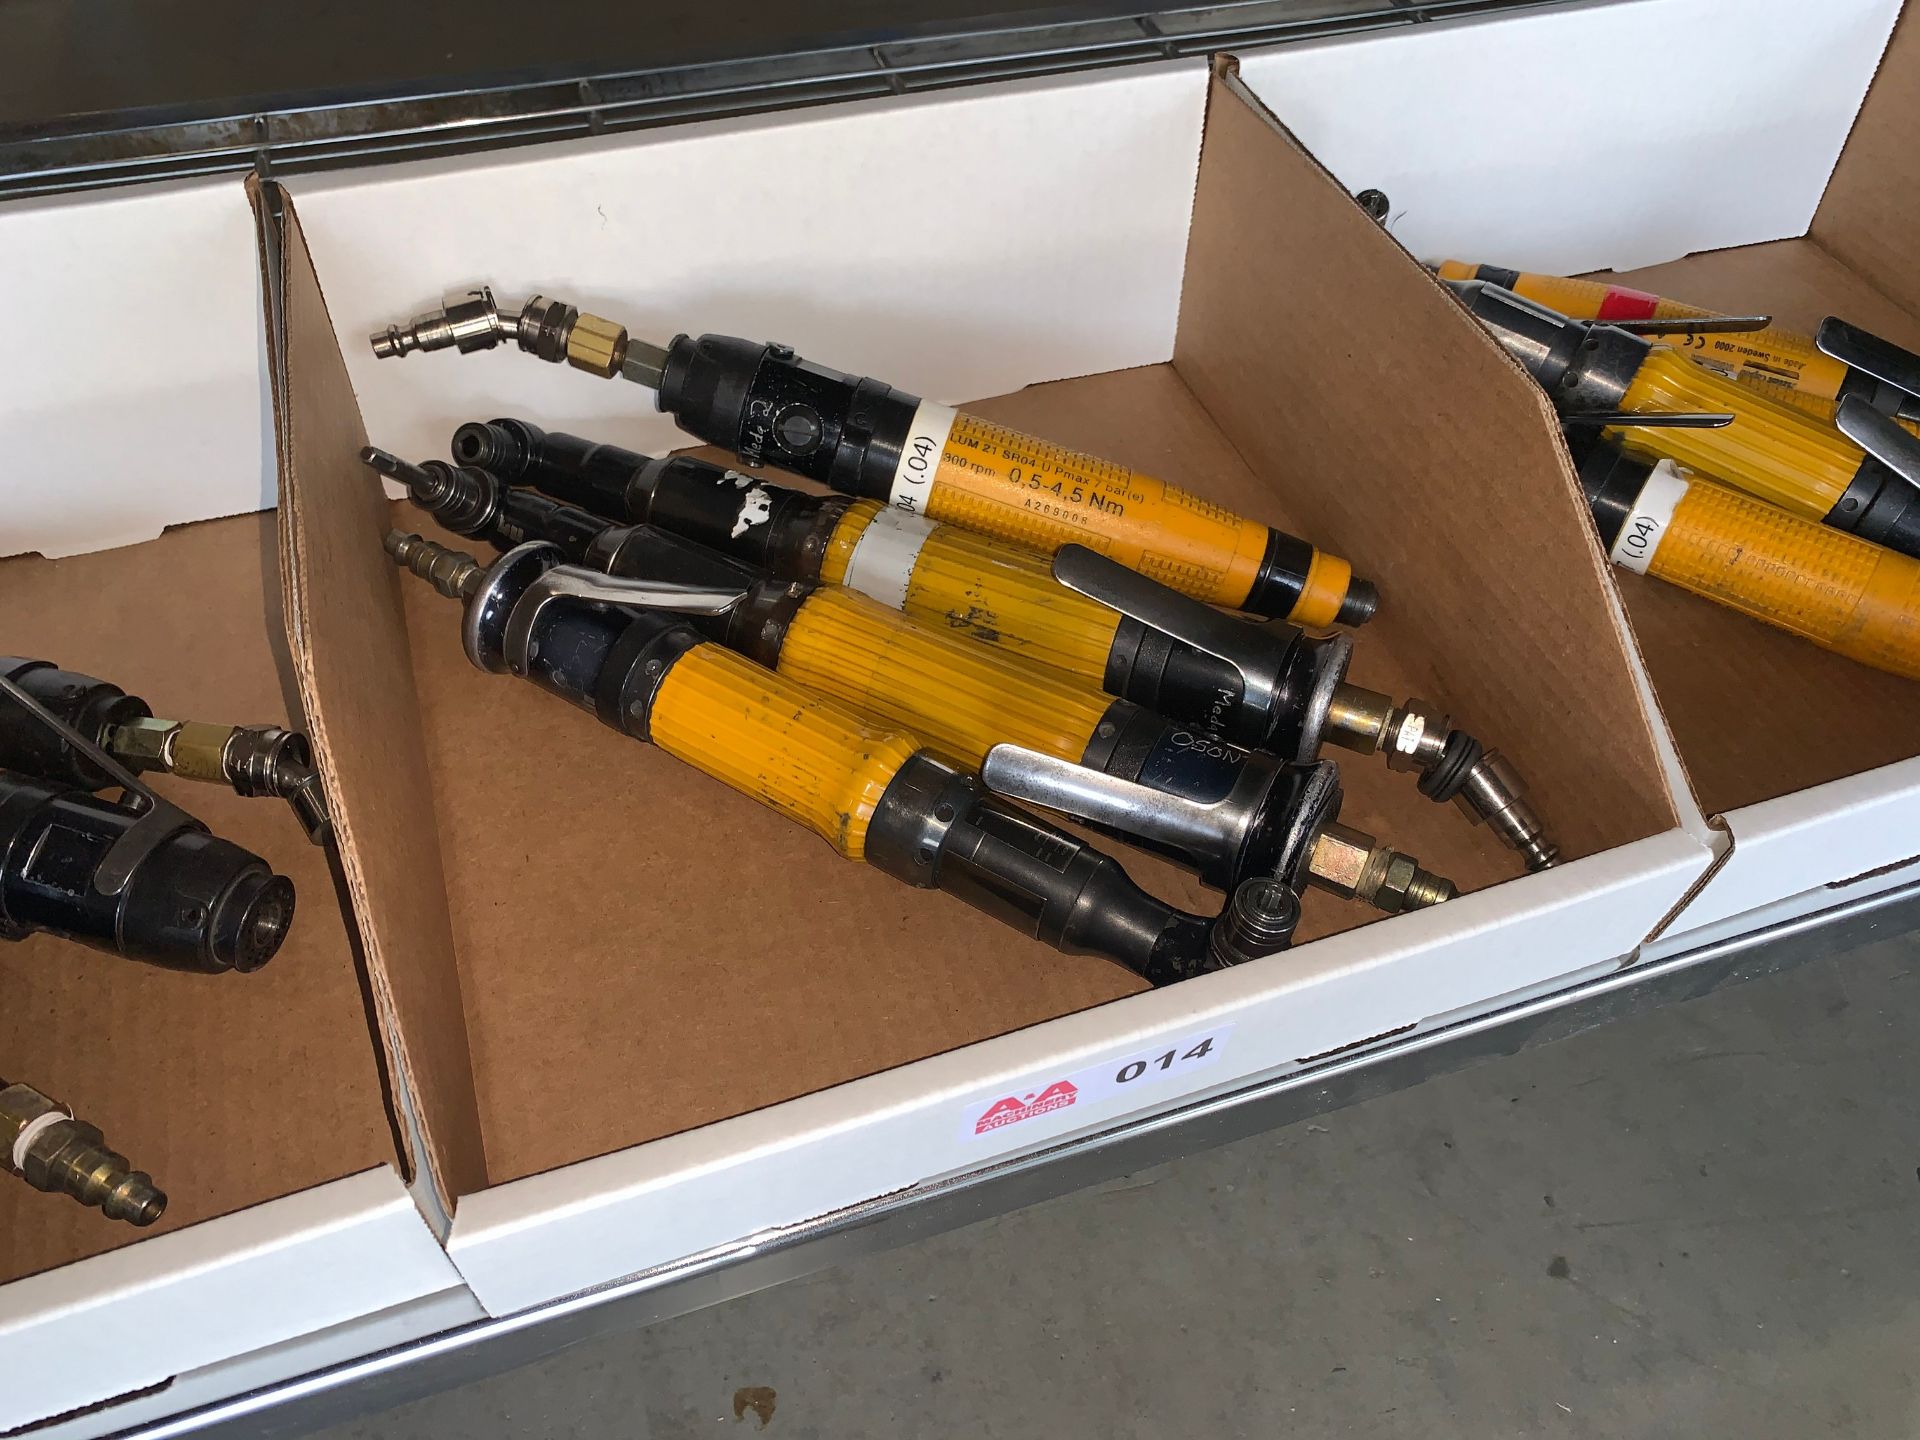 Lot with (4) Pneumatic Drills